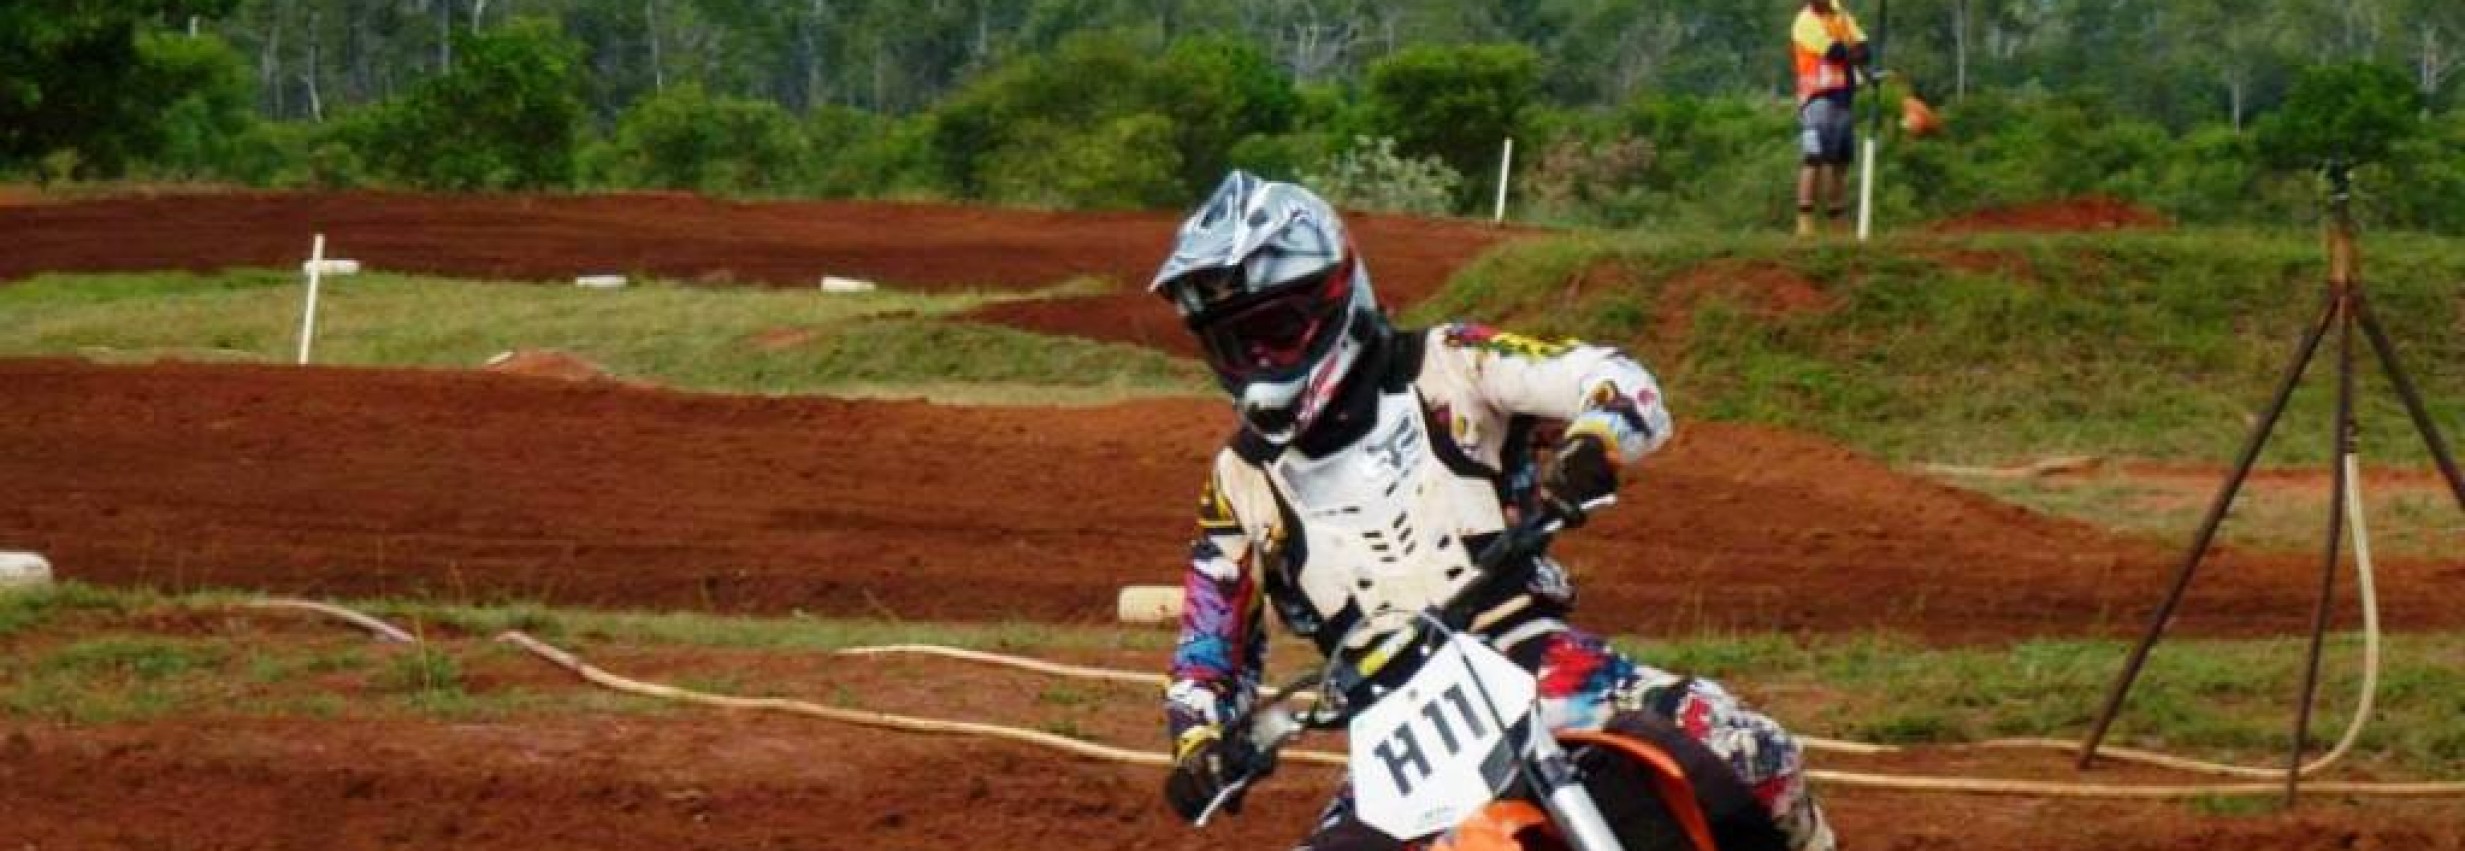 Weipa MX Track – Cape York Motorcycle Club